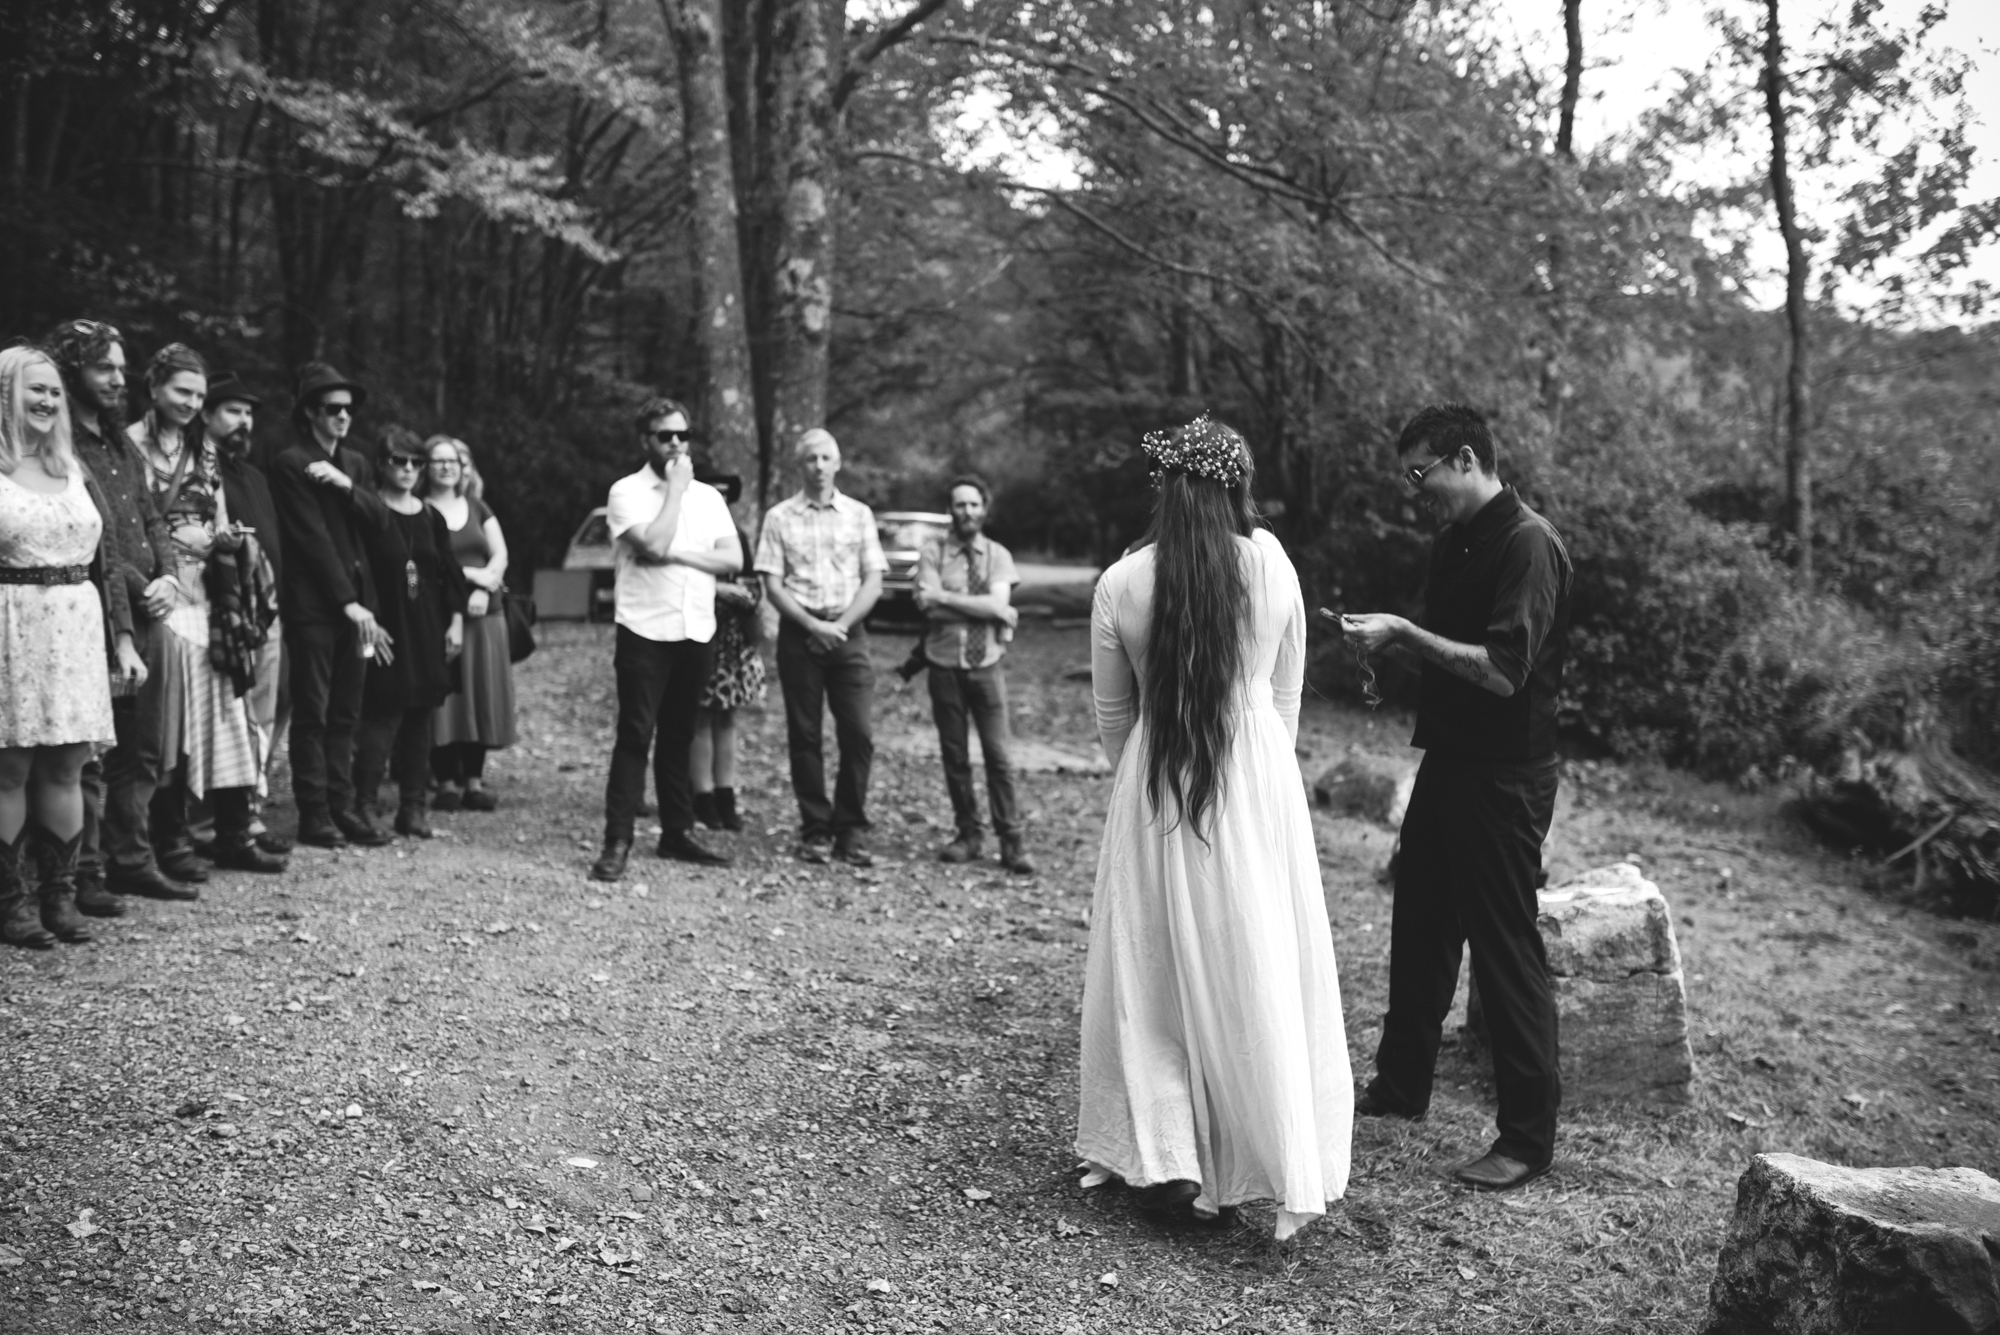  Mountain Wedding, Outdoors, Rustic, West Virginia, Maryland Wedding Photographer, DIY, Casual, guests gathered to watch ceremony, black and white ceremony, bride with long hair and flowers 